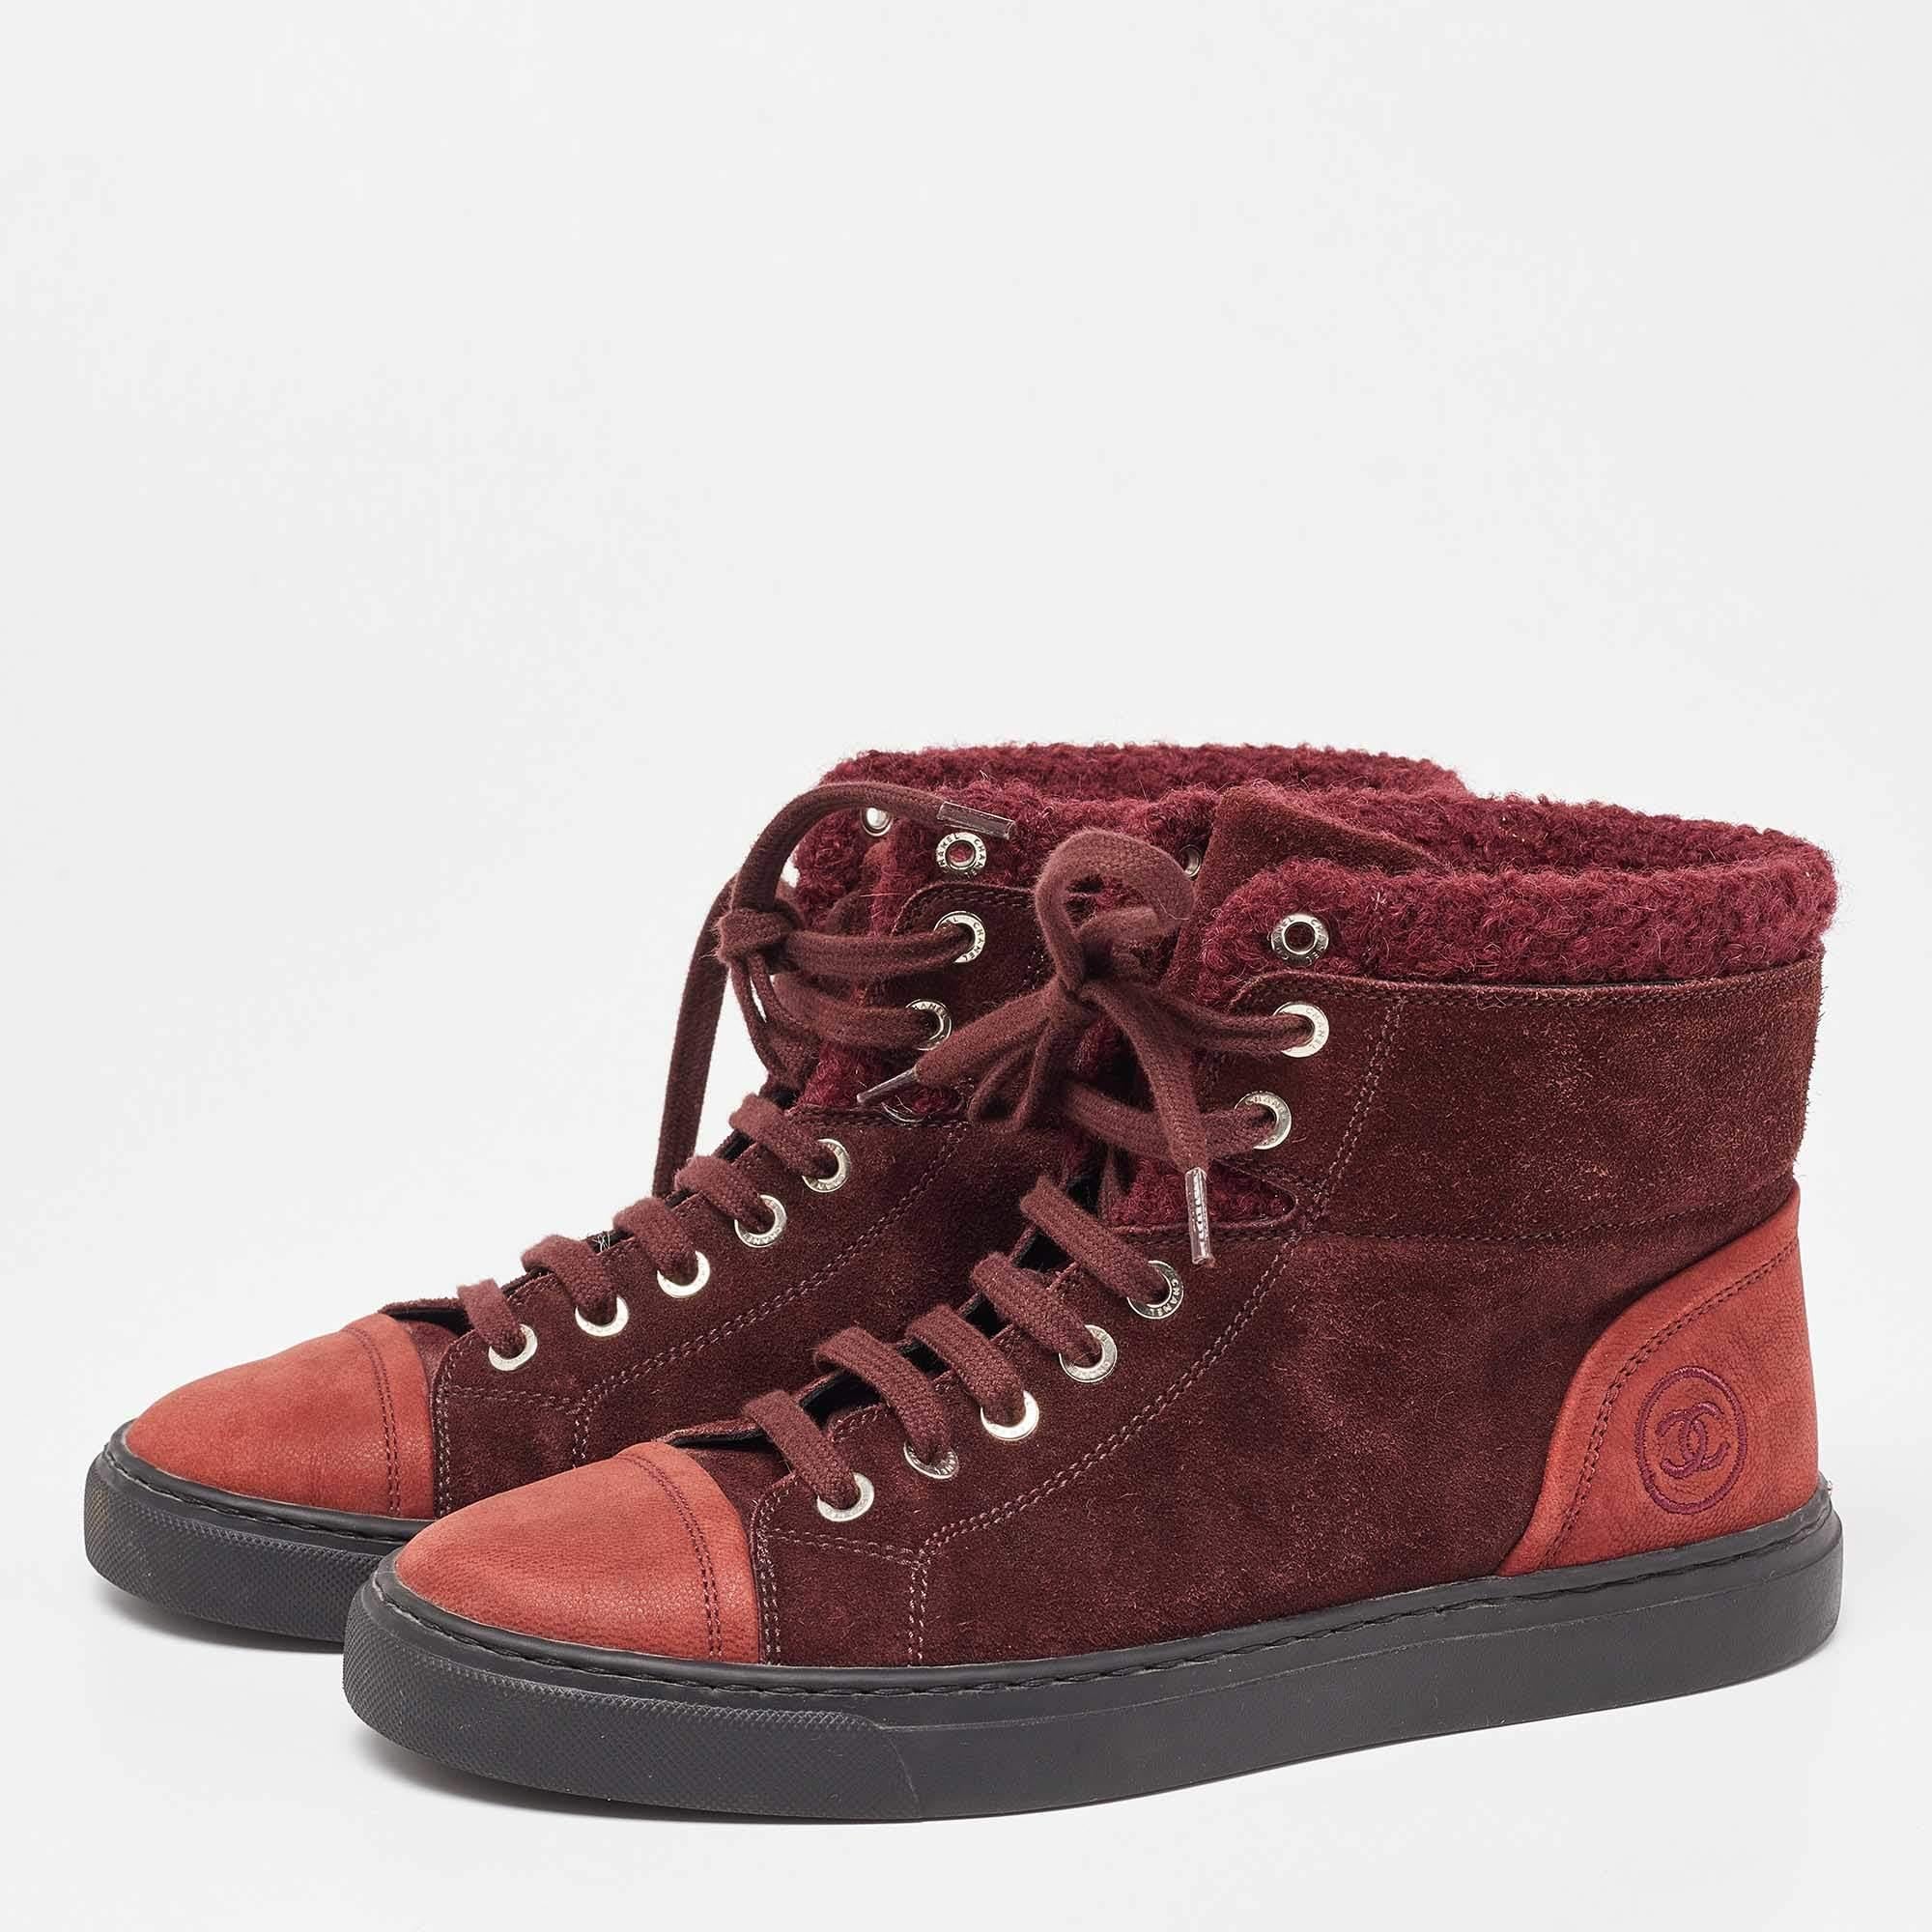 Chanel Burgundy Suede and Wool Trim CC High Top Sneakers Size 37.5 In Good Condition For Sale In Dubai, Al Qouz 2